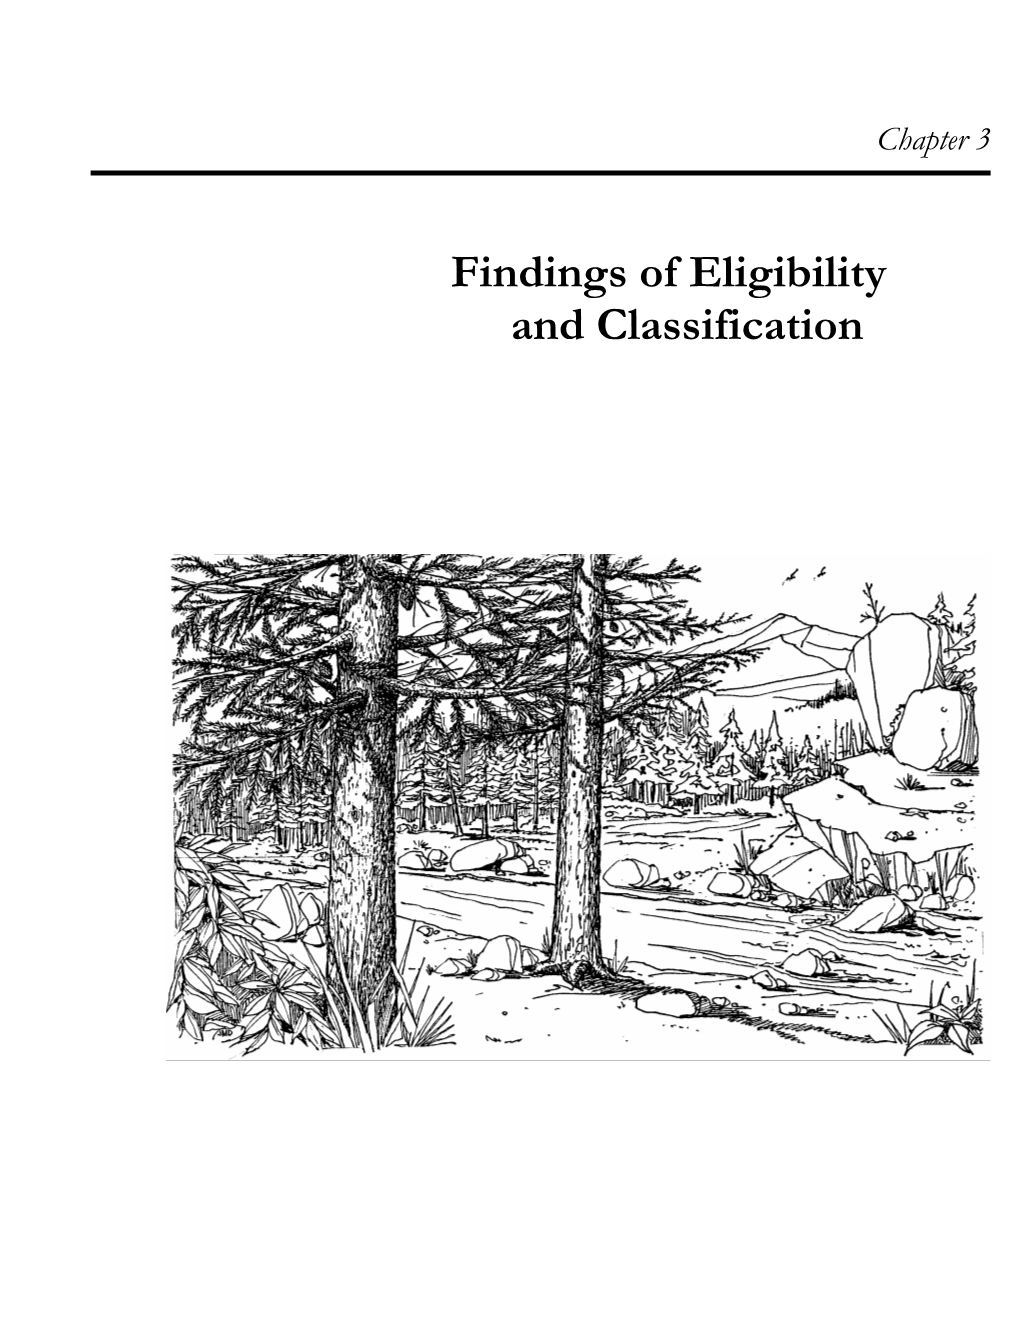 Findings of Eligibility and Classification